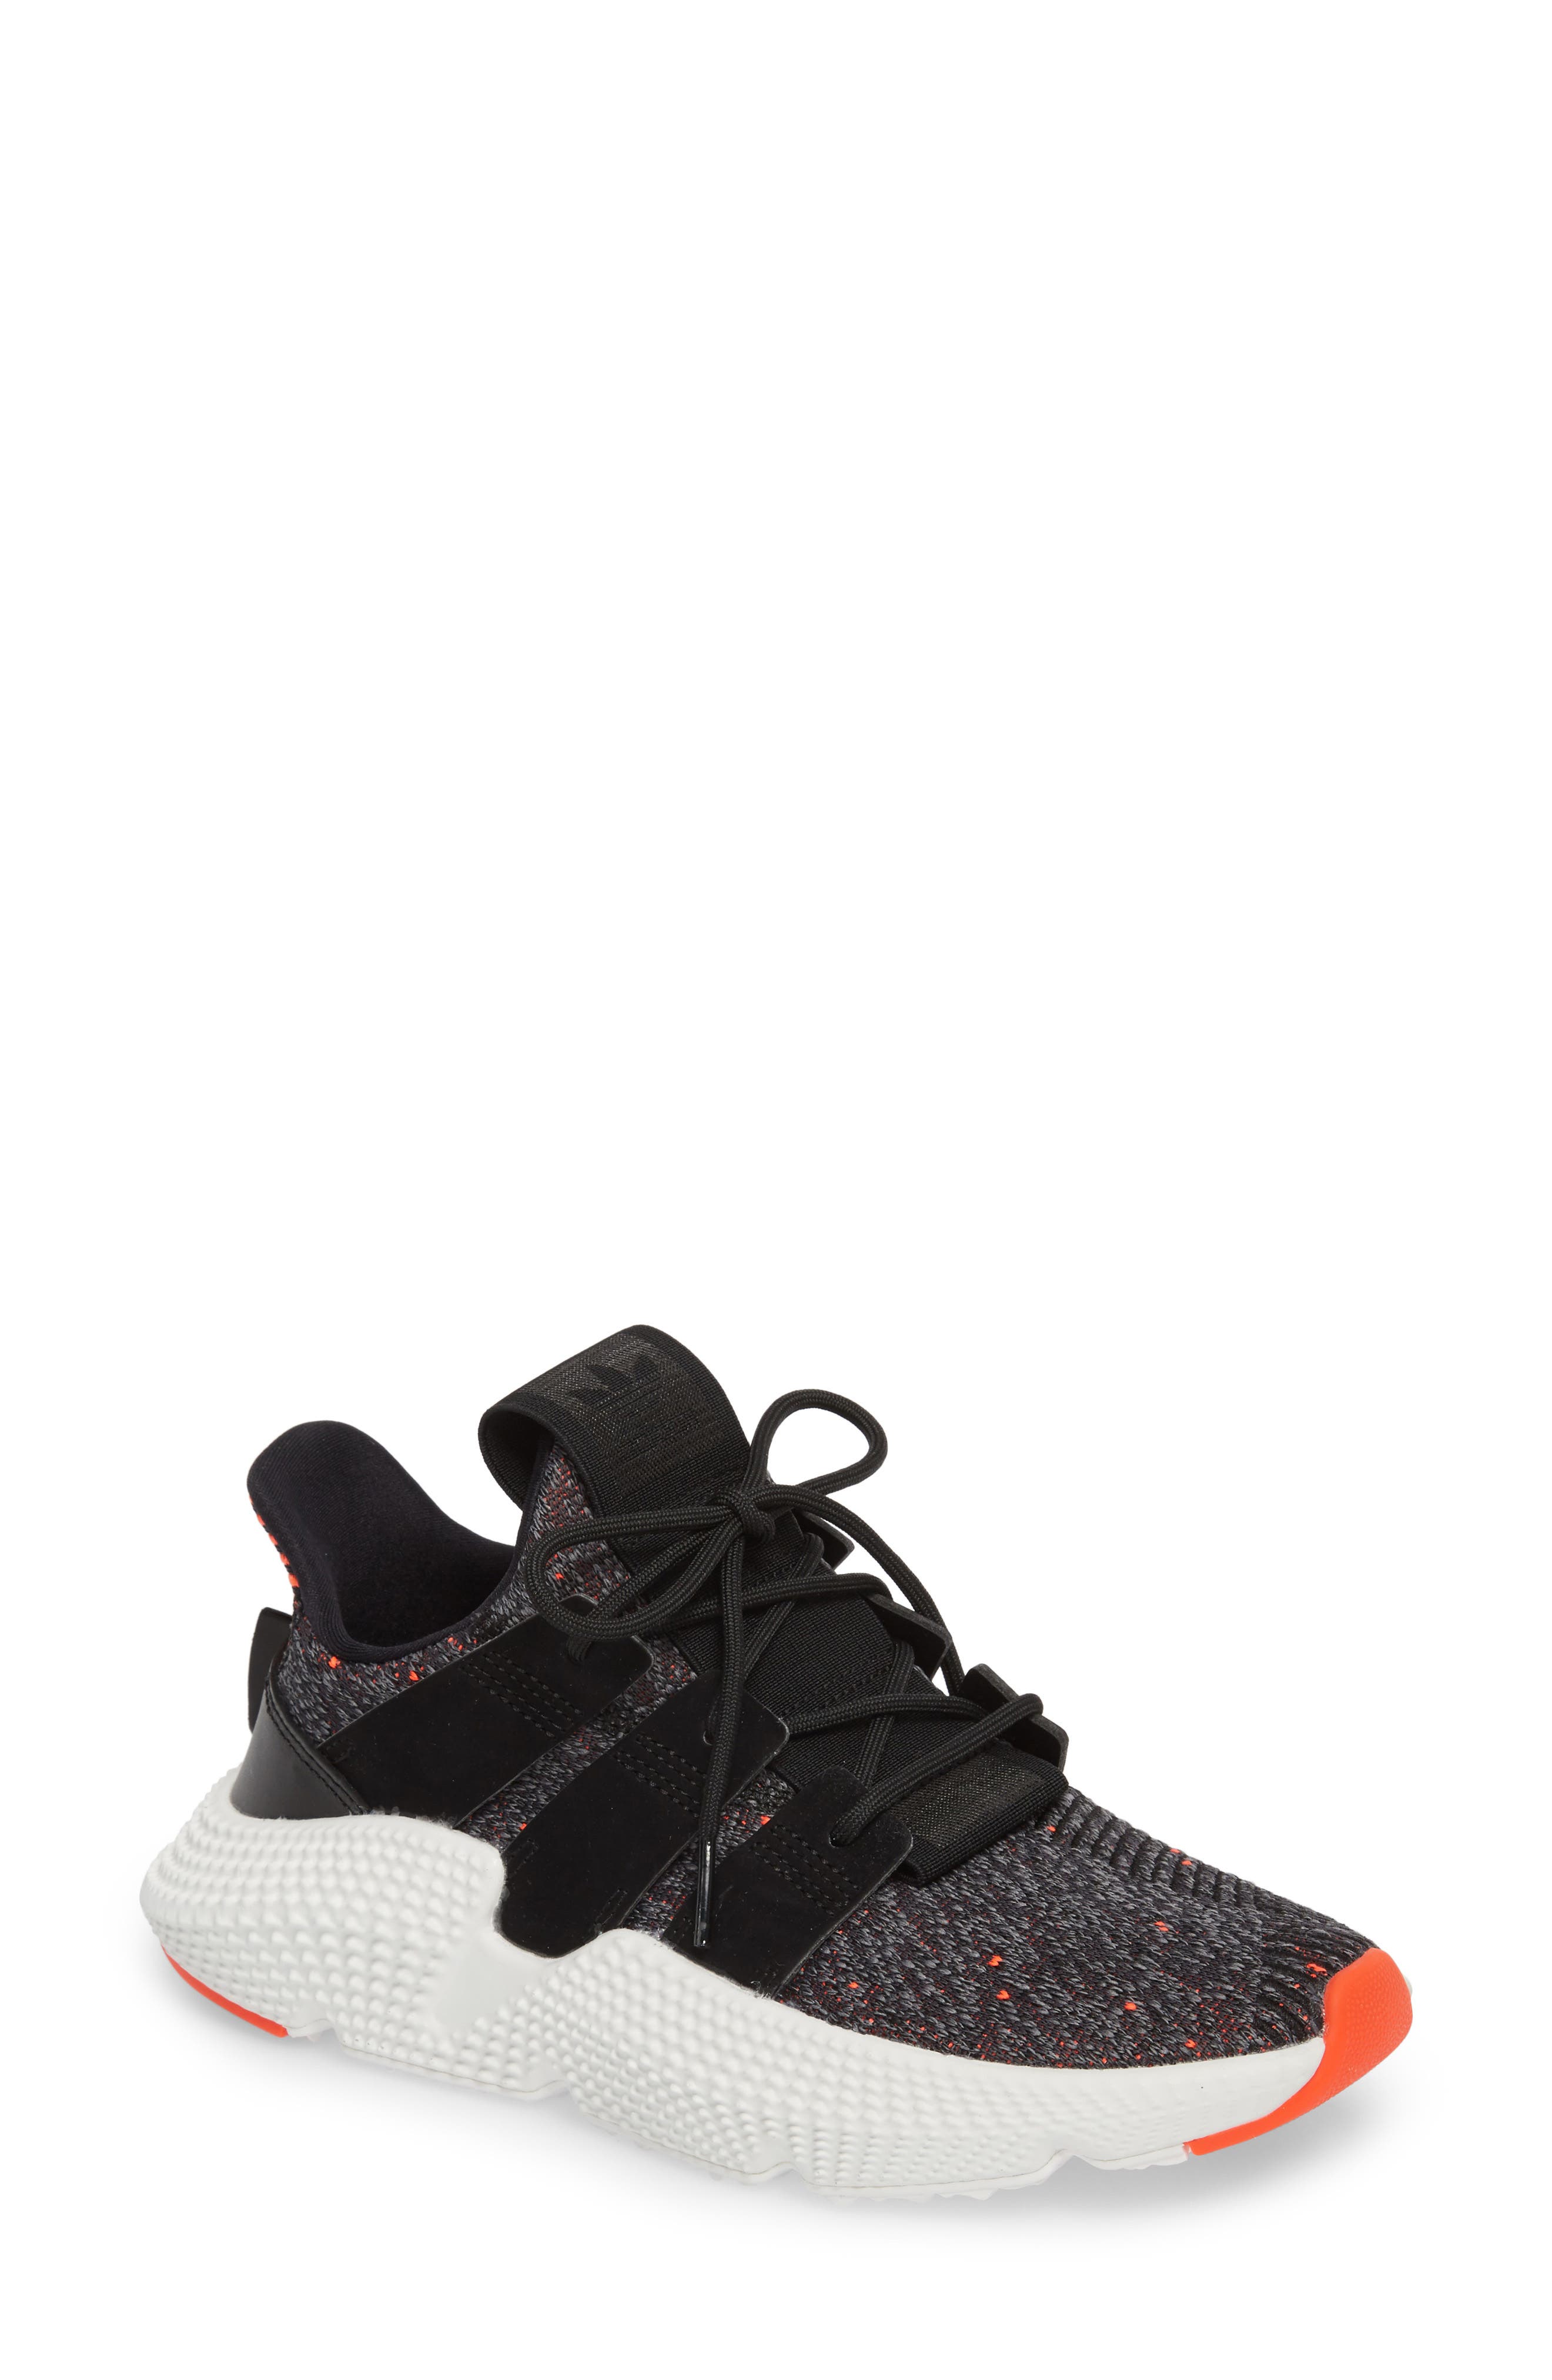 adidas prophere for women